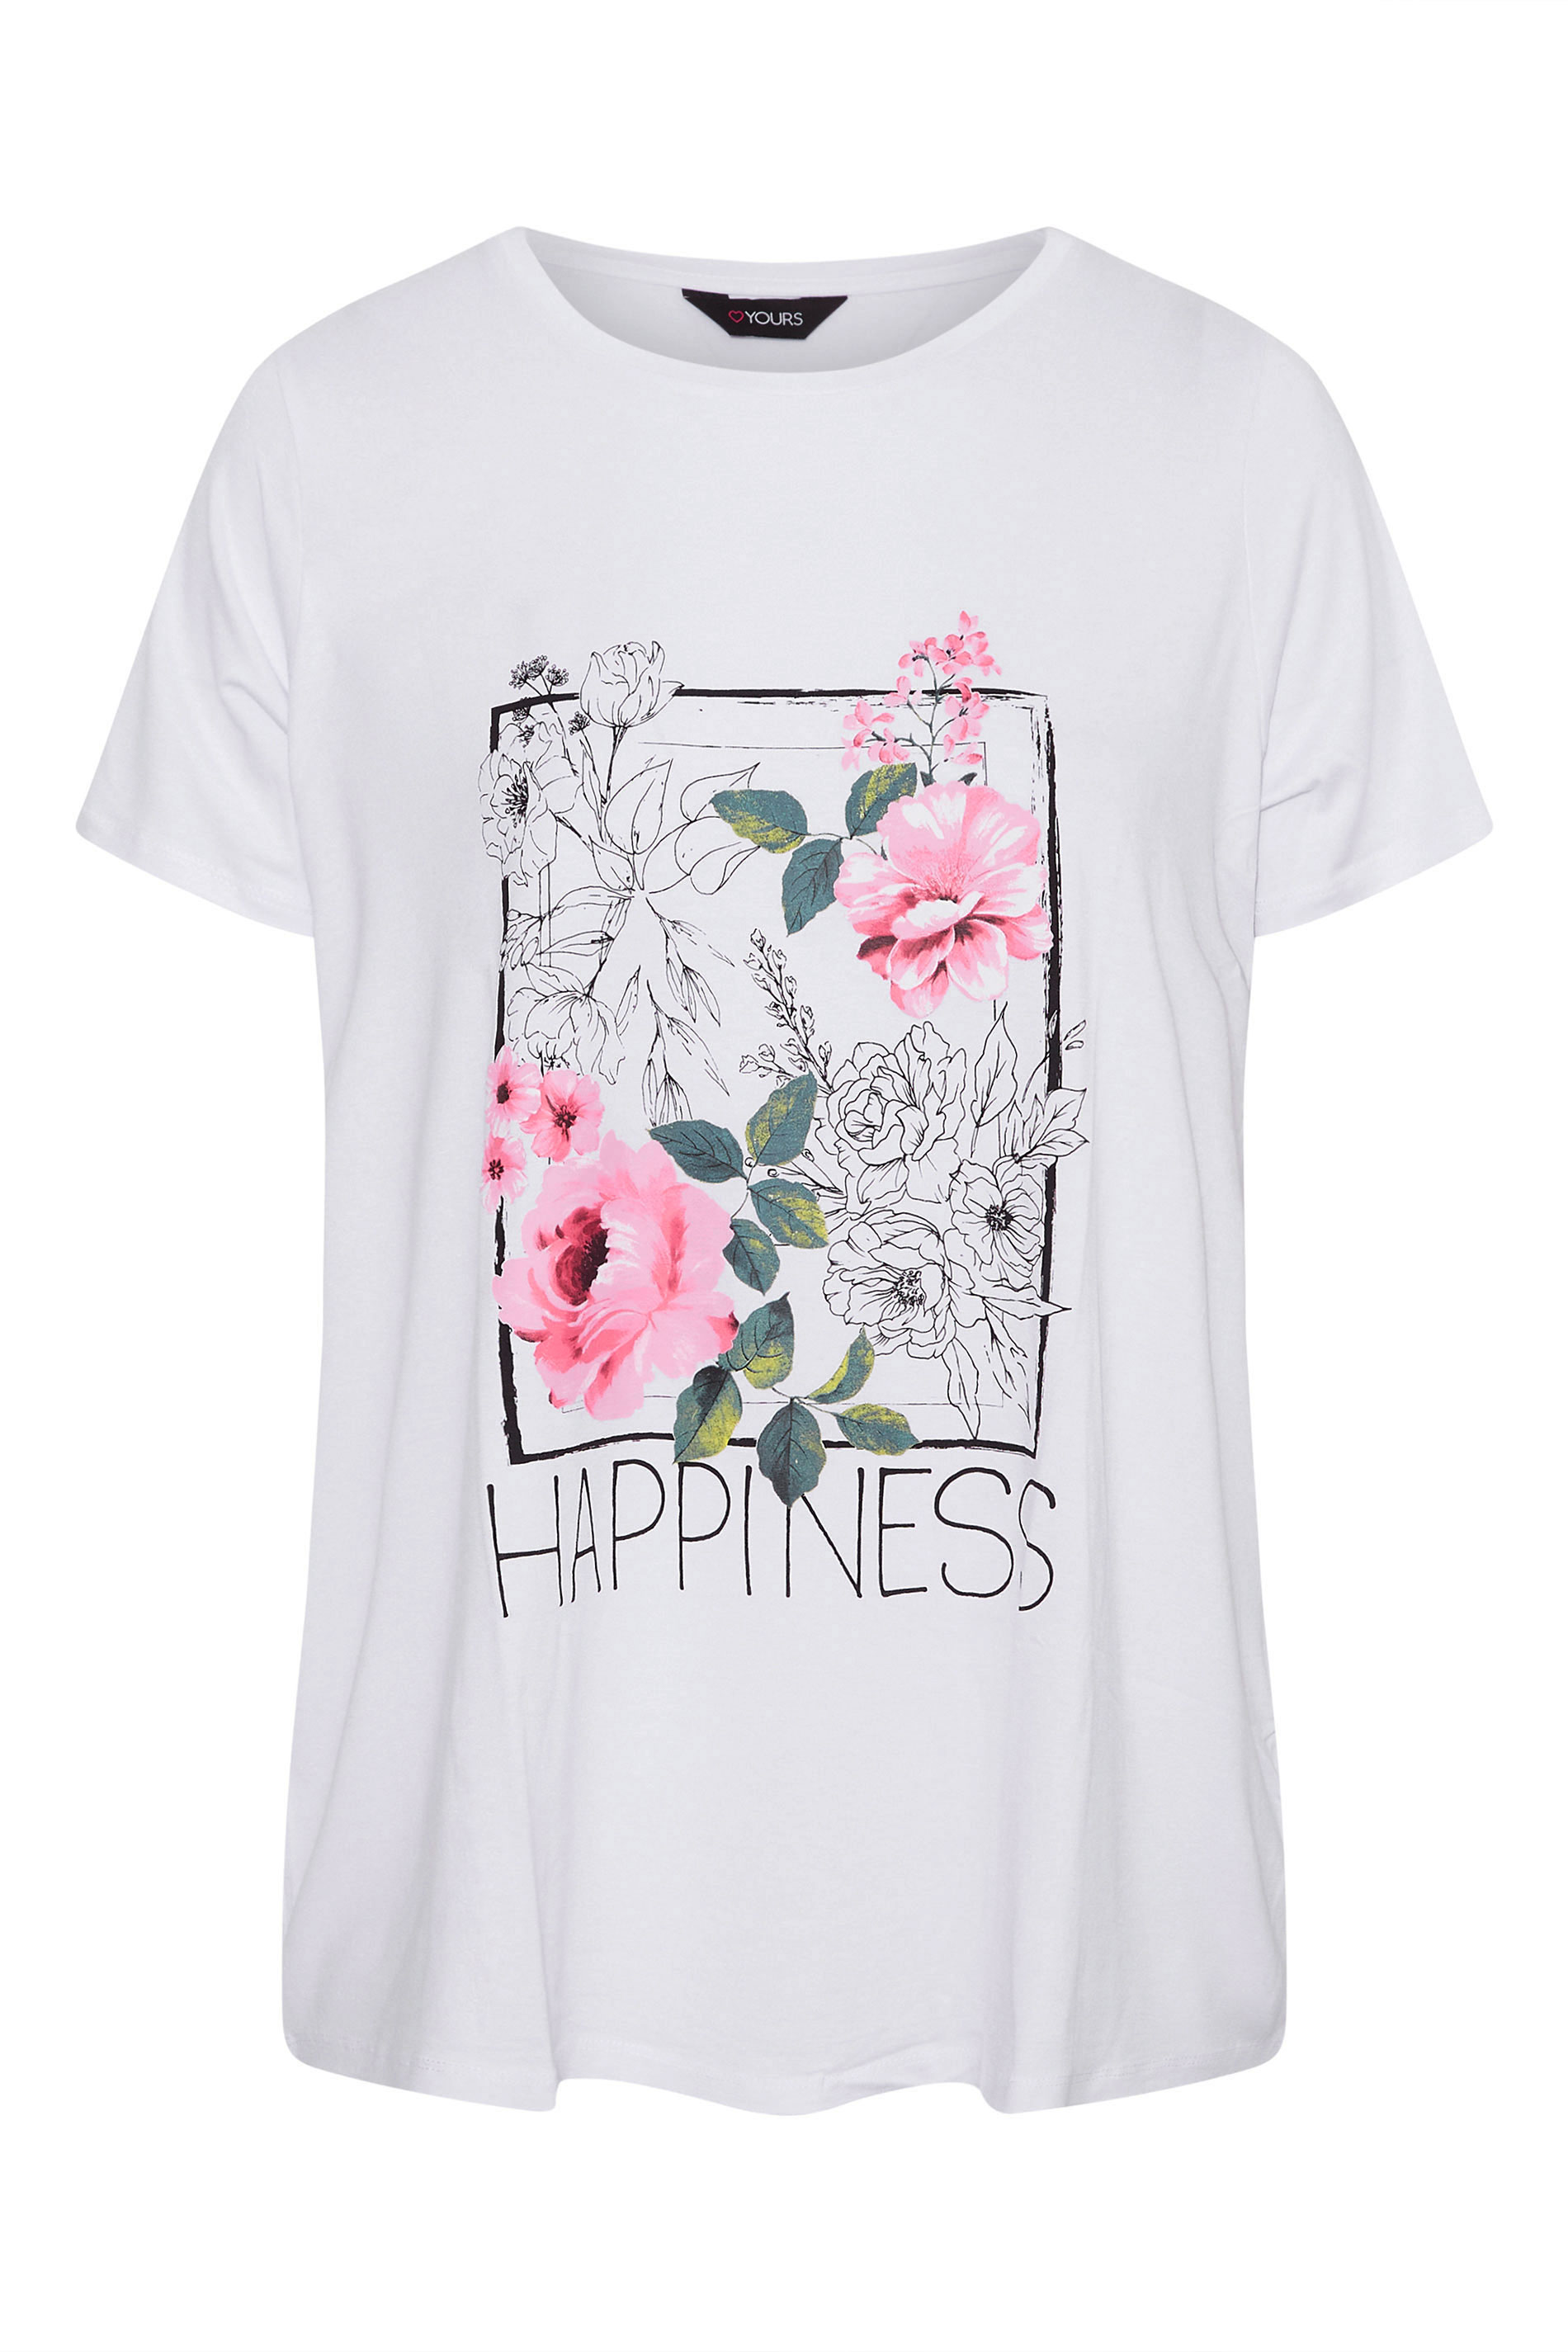 Grande taille  Tops Grande taille  Tops à Slogans | T-Shirt Blanc Floral Slogan Happiness - BA19584